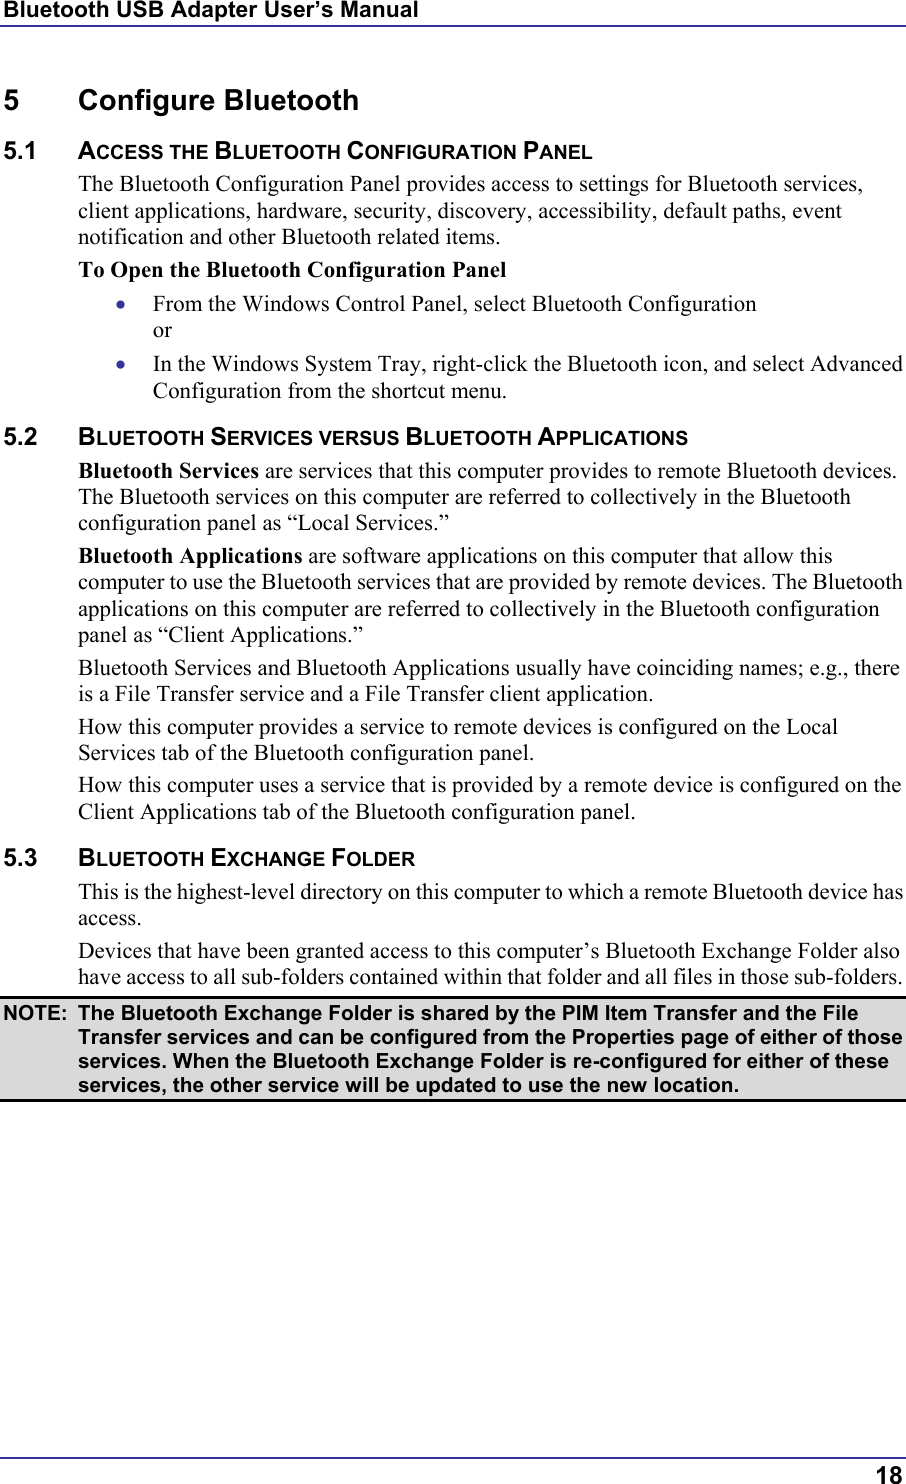 Bluetooth USB Adapter User’s Manual 5 Configure Bluetooth 5.1 ACCESS THE BLUETOOTH CONFIGURATION PANEL The Bluetooth Configuration Panel provides access to settings for Bluetooth services, client applications, hardware, security, discovery, accessibility, default paths, event notification and other Bluetooth related items. To Open the Bluetooth Configuration Panel From the Windows Control Panel, select Bluetooth Configuration or • •  In the Windows System Tray, right-click the Bluetooth icon, and select Advanced Configuration from the shortcut menu. 5.2 BLUETOOTH SERVICES VERSUS BLUETOOTH APPLICATIONS Bluetooth Services are services that this computer provides to remote Bluetooth devices. The Bluetooth services on this computer are referred to collectively in the Bluetooth configuration panel as “Local Services.” Bluetooth Applications are software applications on this computer that allow this computer to use the Bluetooth services that are provided by remote devices. The Bluetooth applications on this computer are referred to collectively in the Bluetooth configuration panel as “Client Applications.” Bluetooth Services and Bluetooth Applications usually have coinciding names; e.g., there is a File Transfer service and a File Transfer client application. How this computer provides a service to remote devices is configured on the Local Services tab of the Bluetooth configuration panel. How this computer uses a service that is provided by a remote device is configured on the Client Applications tab of the Bluetooth configuration panel. 5.3 BLUETOOTH EXCHANGE FOLDER This is the highest-level directory on this computer to which a remote Bluetooth device has access. Devices that have been granted access to this computer’s Bluetooth Exchange Folder also have access to all sub-folders contained within that folder and all files in those sub-folders. NOTE:  The Bluetooth Exchange Folder is shared by the PIM Item Transfer and the File Transfer services and can be configured from the Properties page of either of those services. When the Bluetooth Exchange Folder is re-configured for either of these services, the other service will be updated to use the new location.  18 